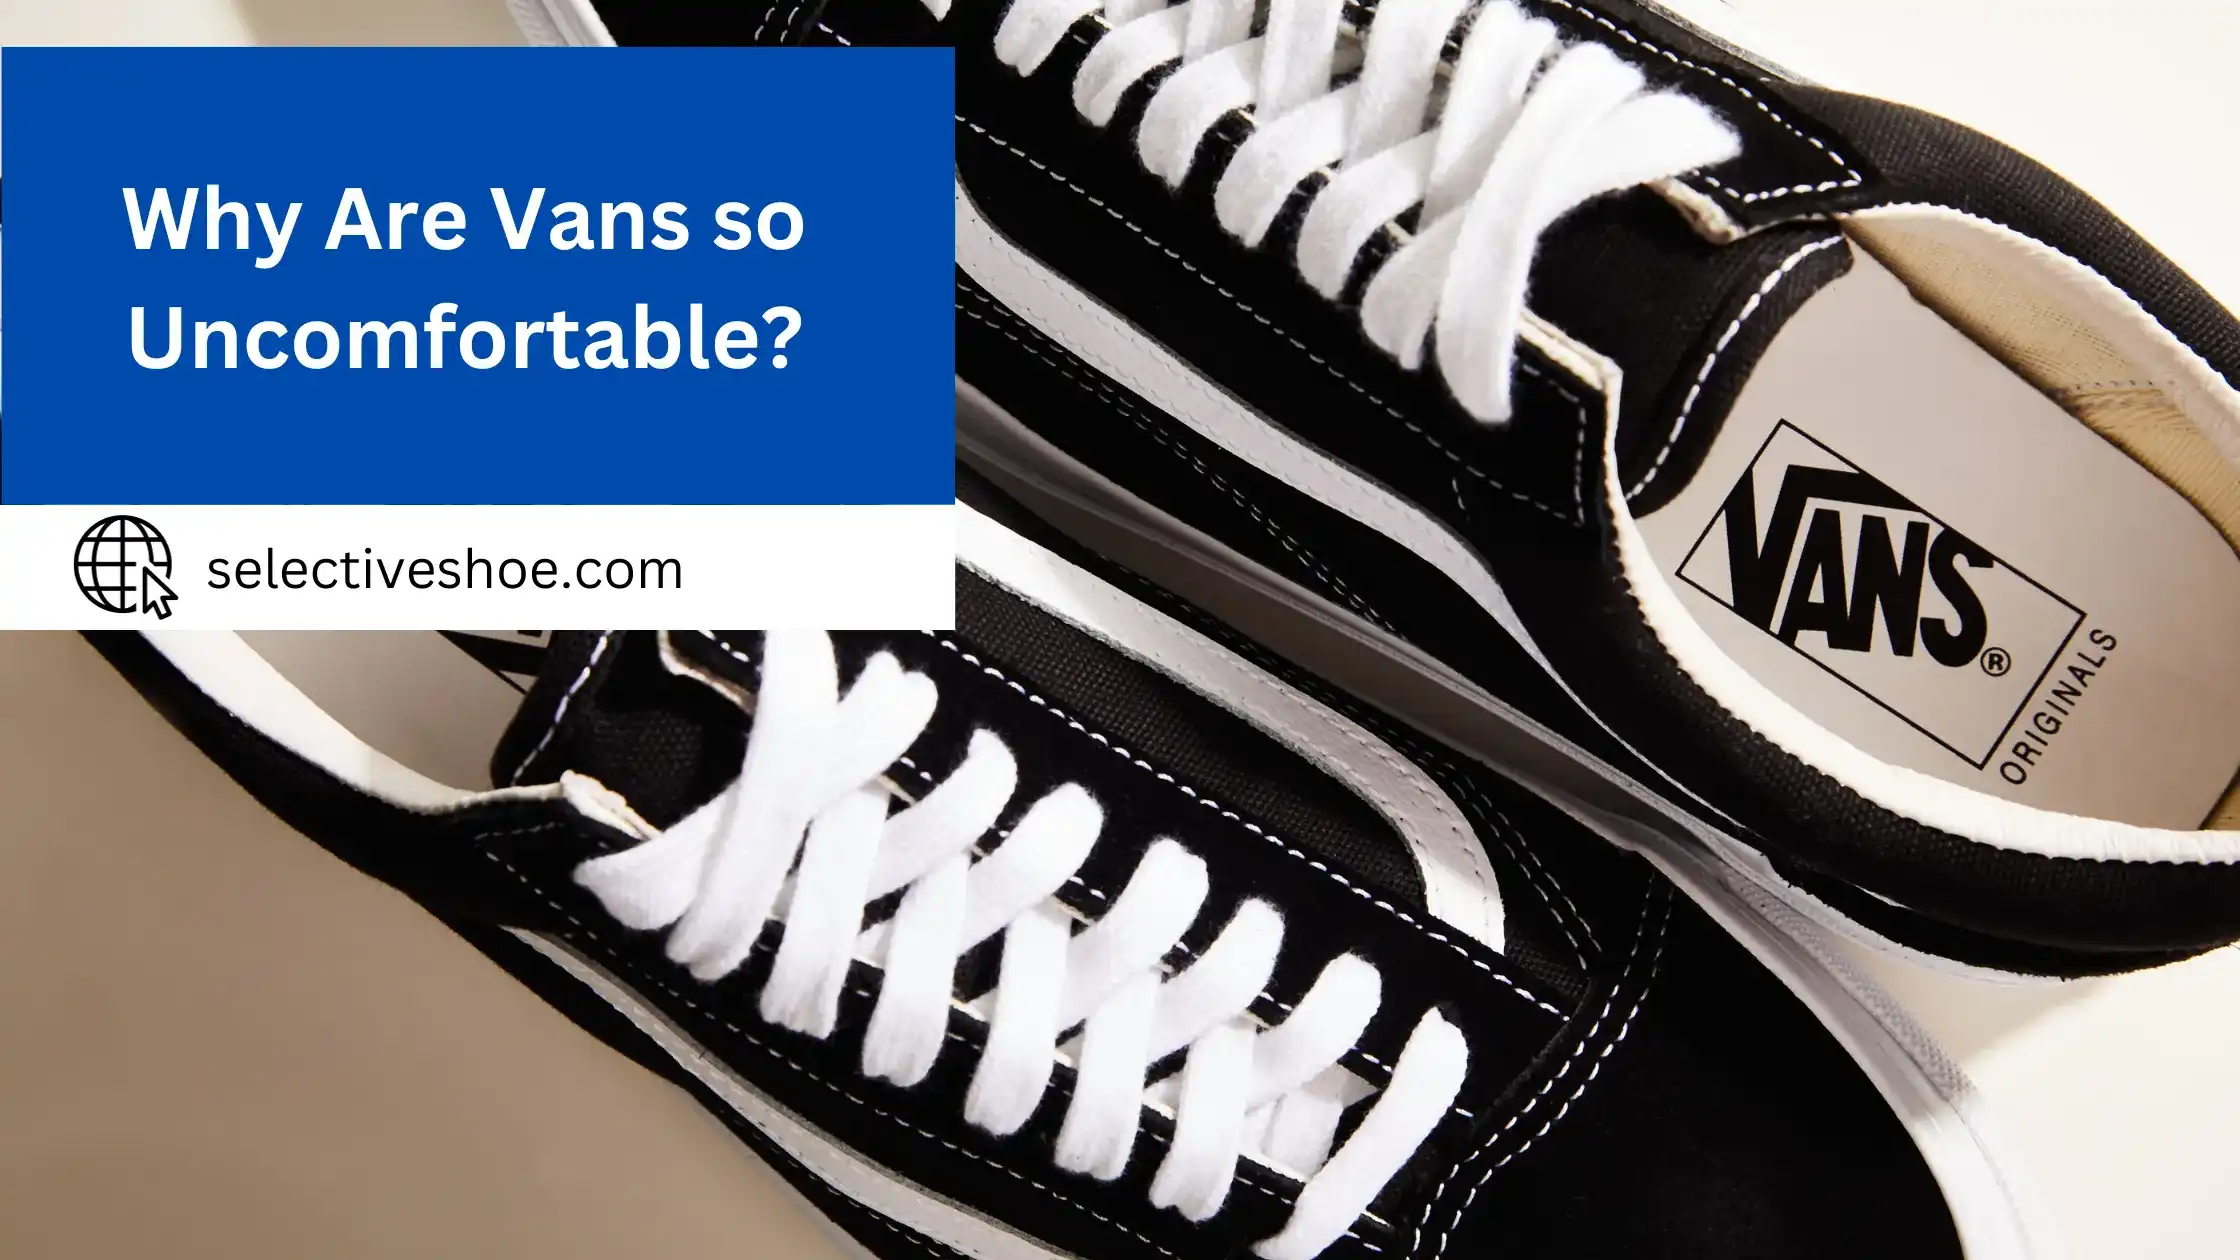 Why Are Vans So Uncomfortable? (An In-Depth Guide)